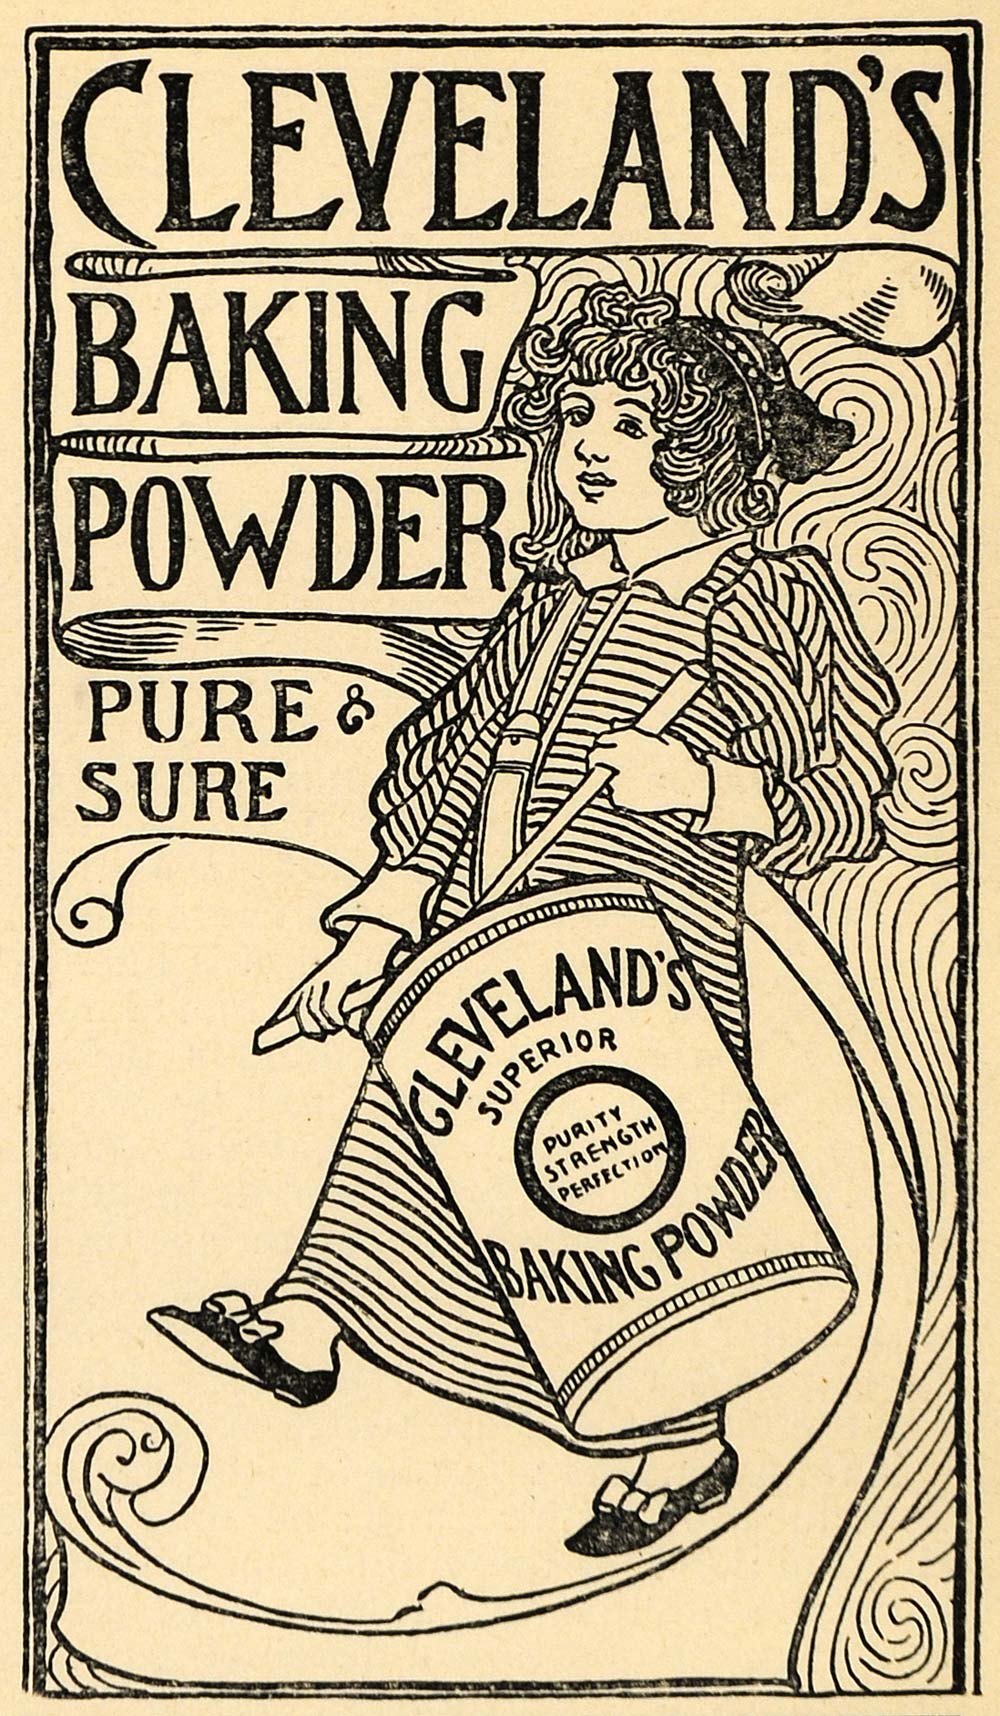 1895 Ad Cleveland's Baking Powder Can Girl in Dress - ORIGINAL ADVERTISING LHJ3